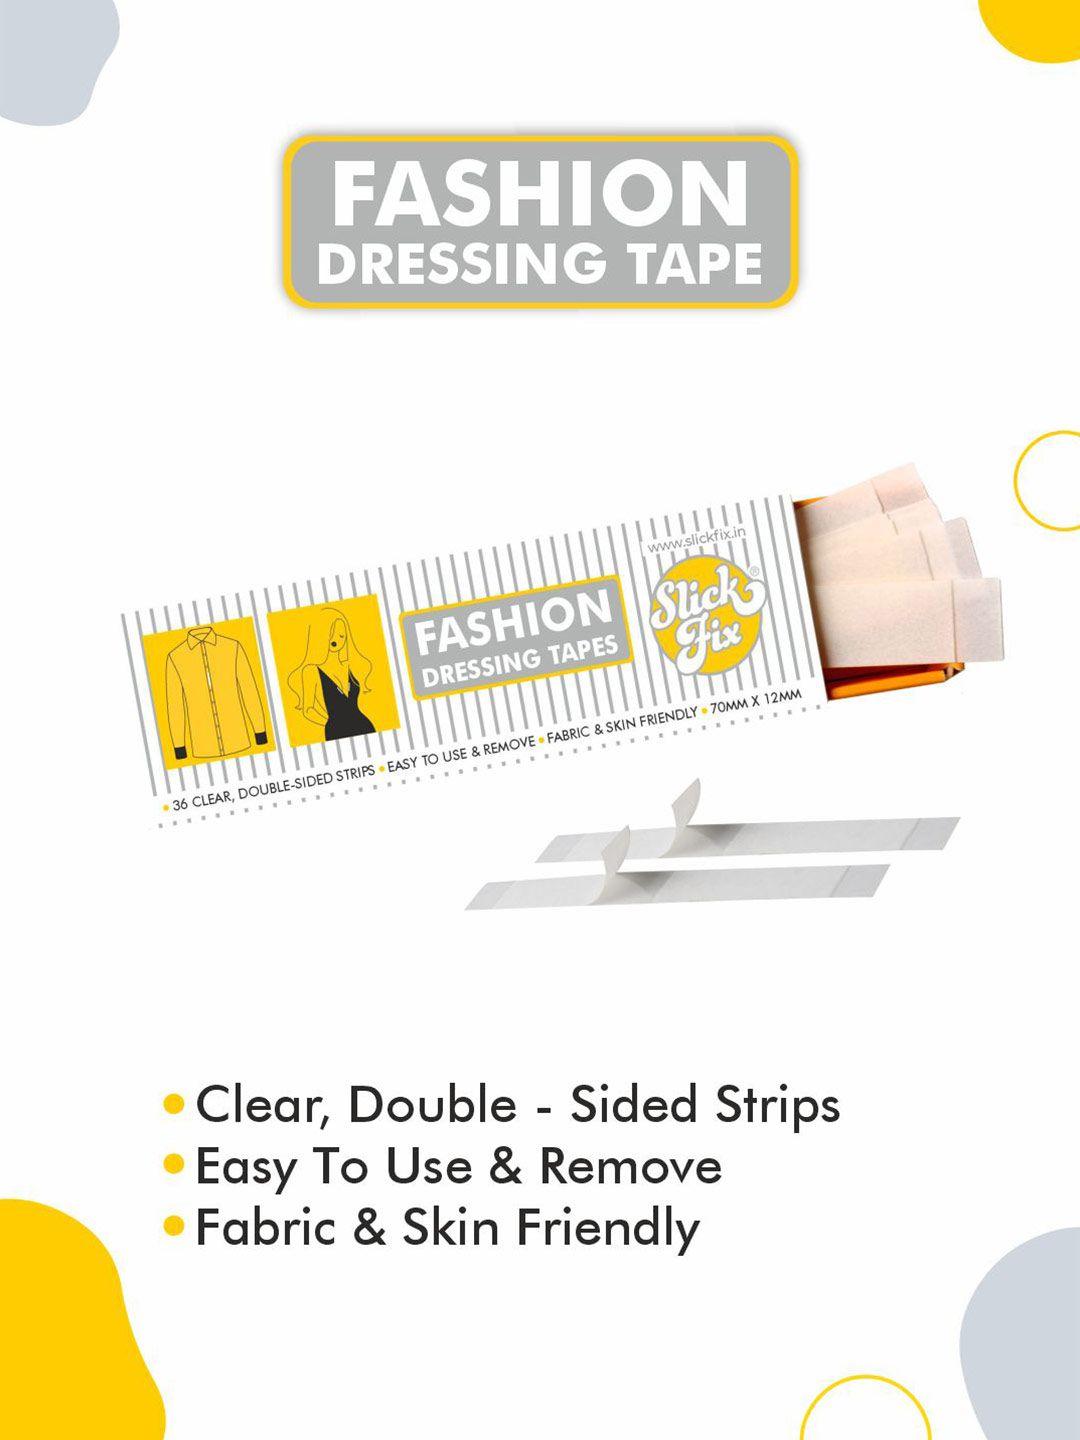 slickfix fashion dressing tape/invisible double-sided body tape strong adhesive - 180 pcs